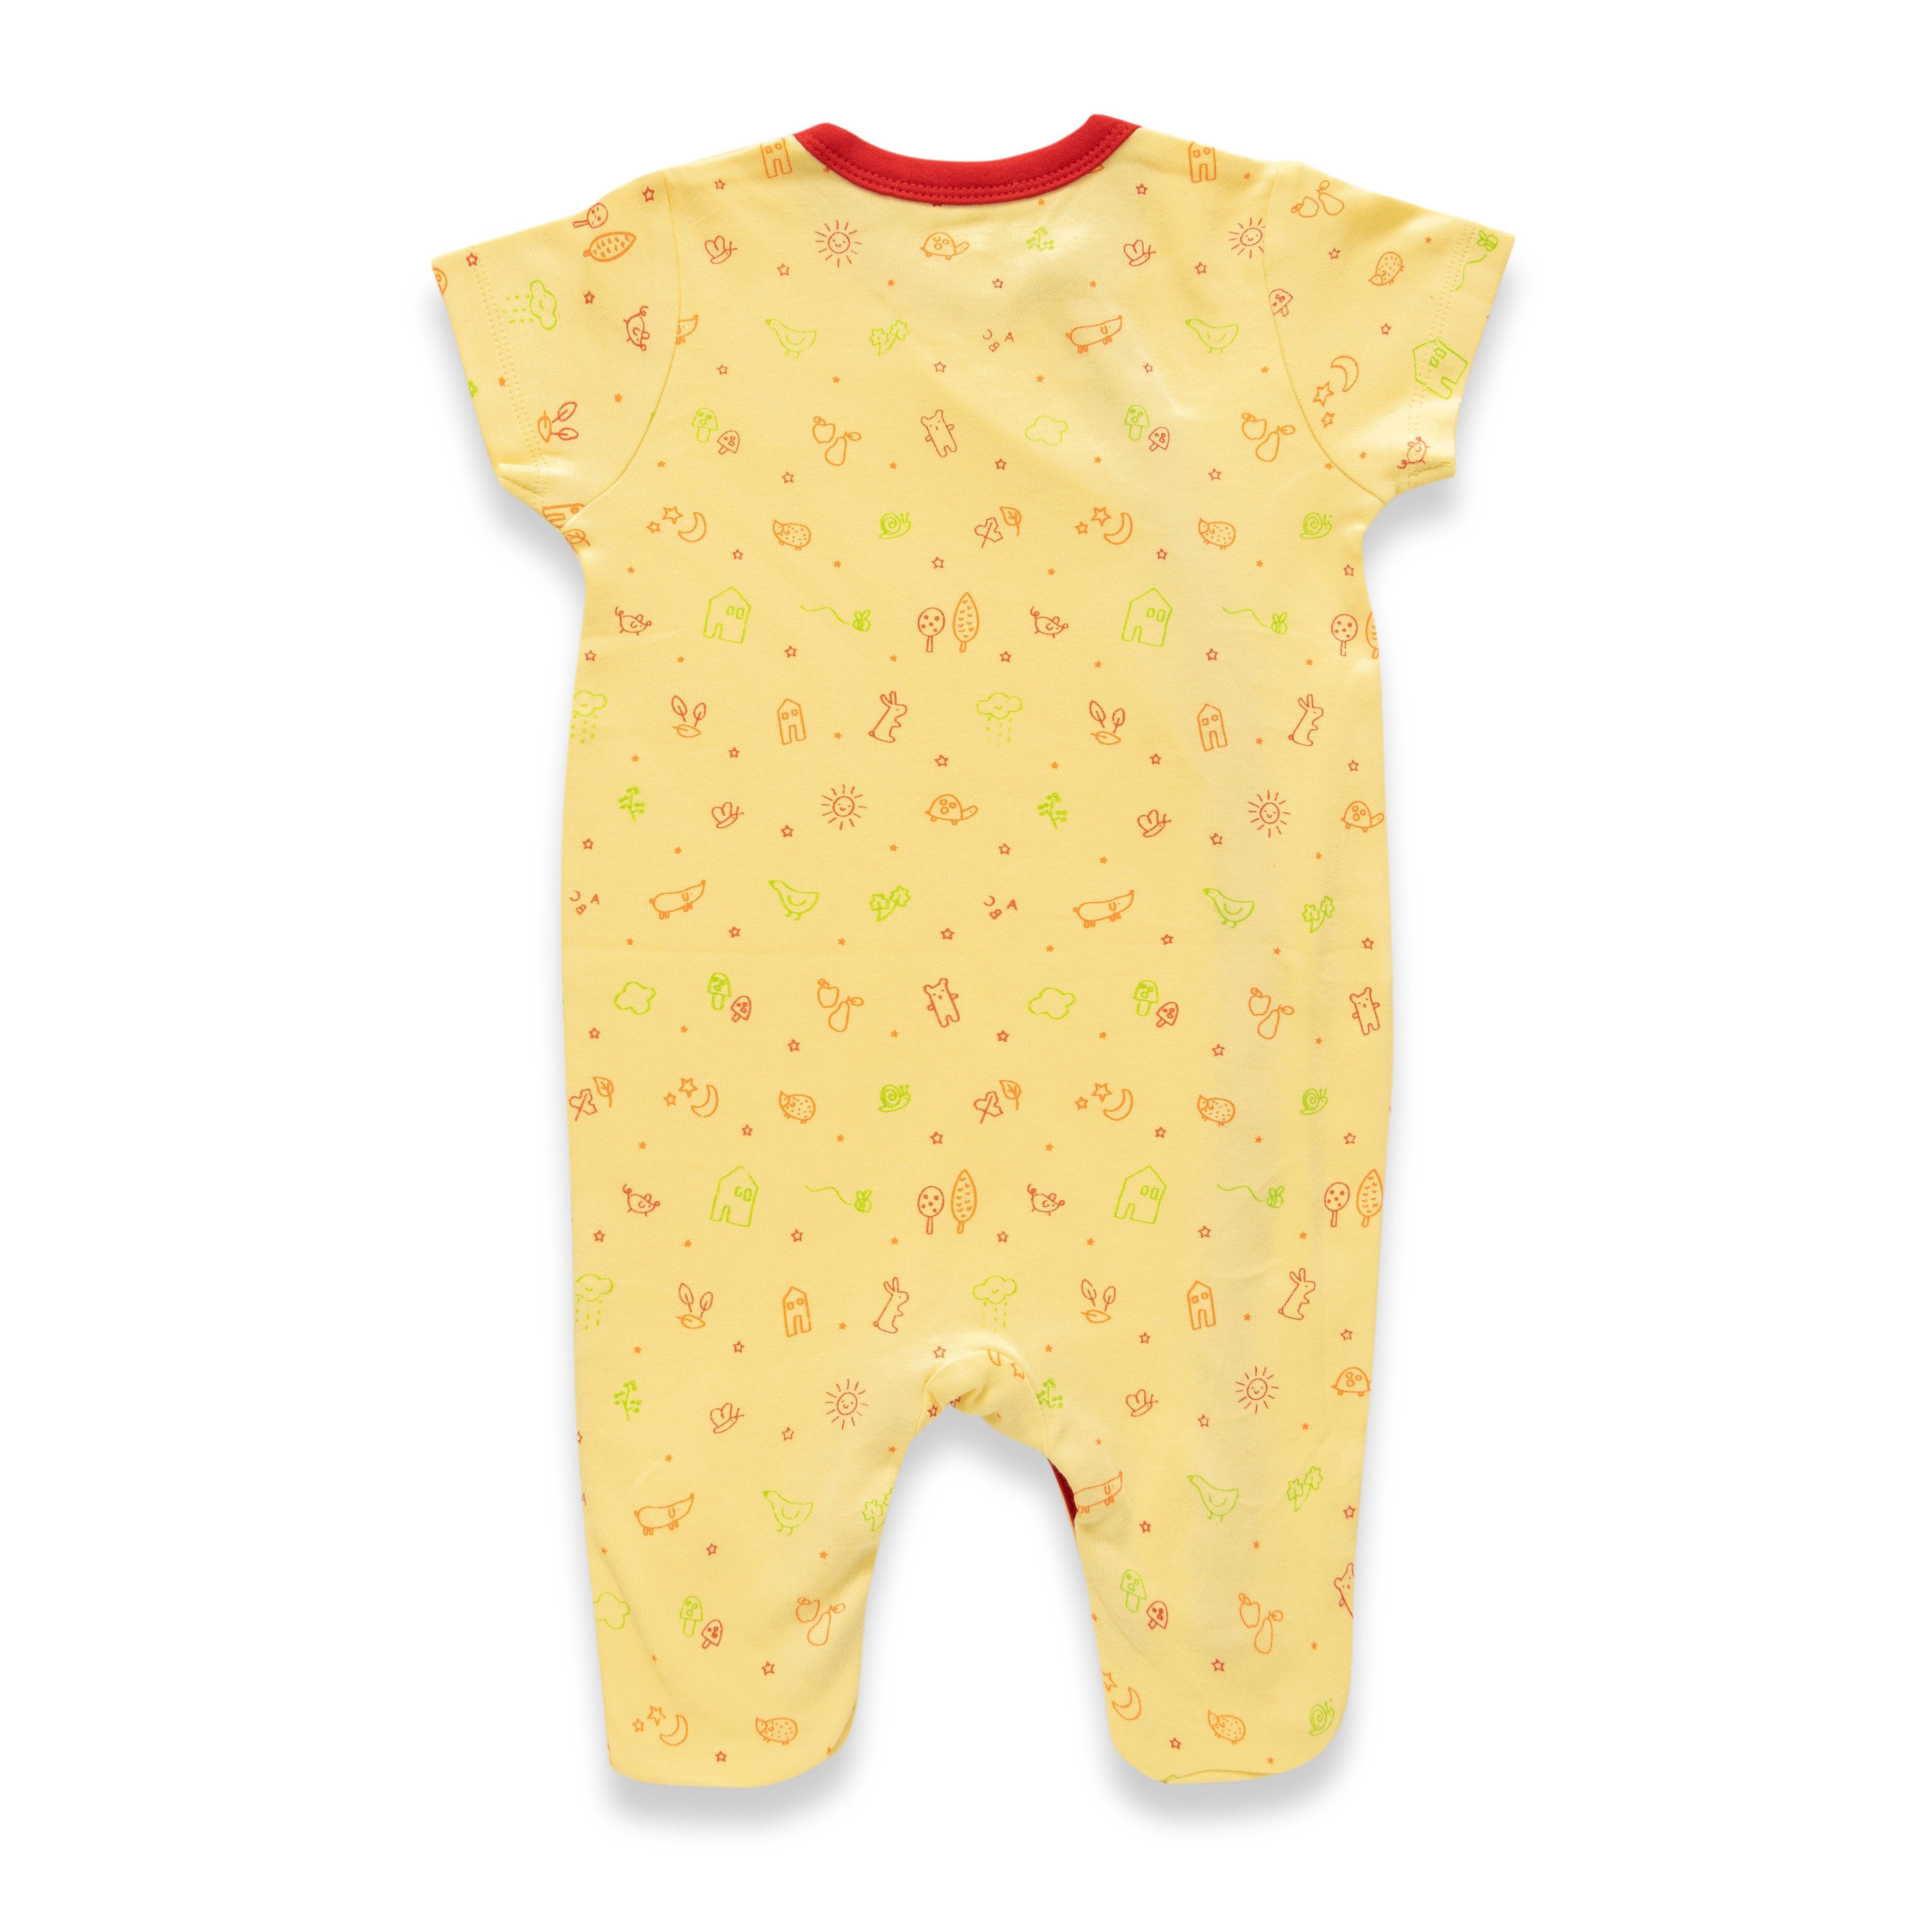 Baby Boys Combo Pack Sleepsuit - Juscubs